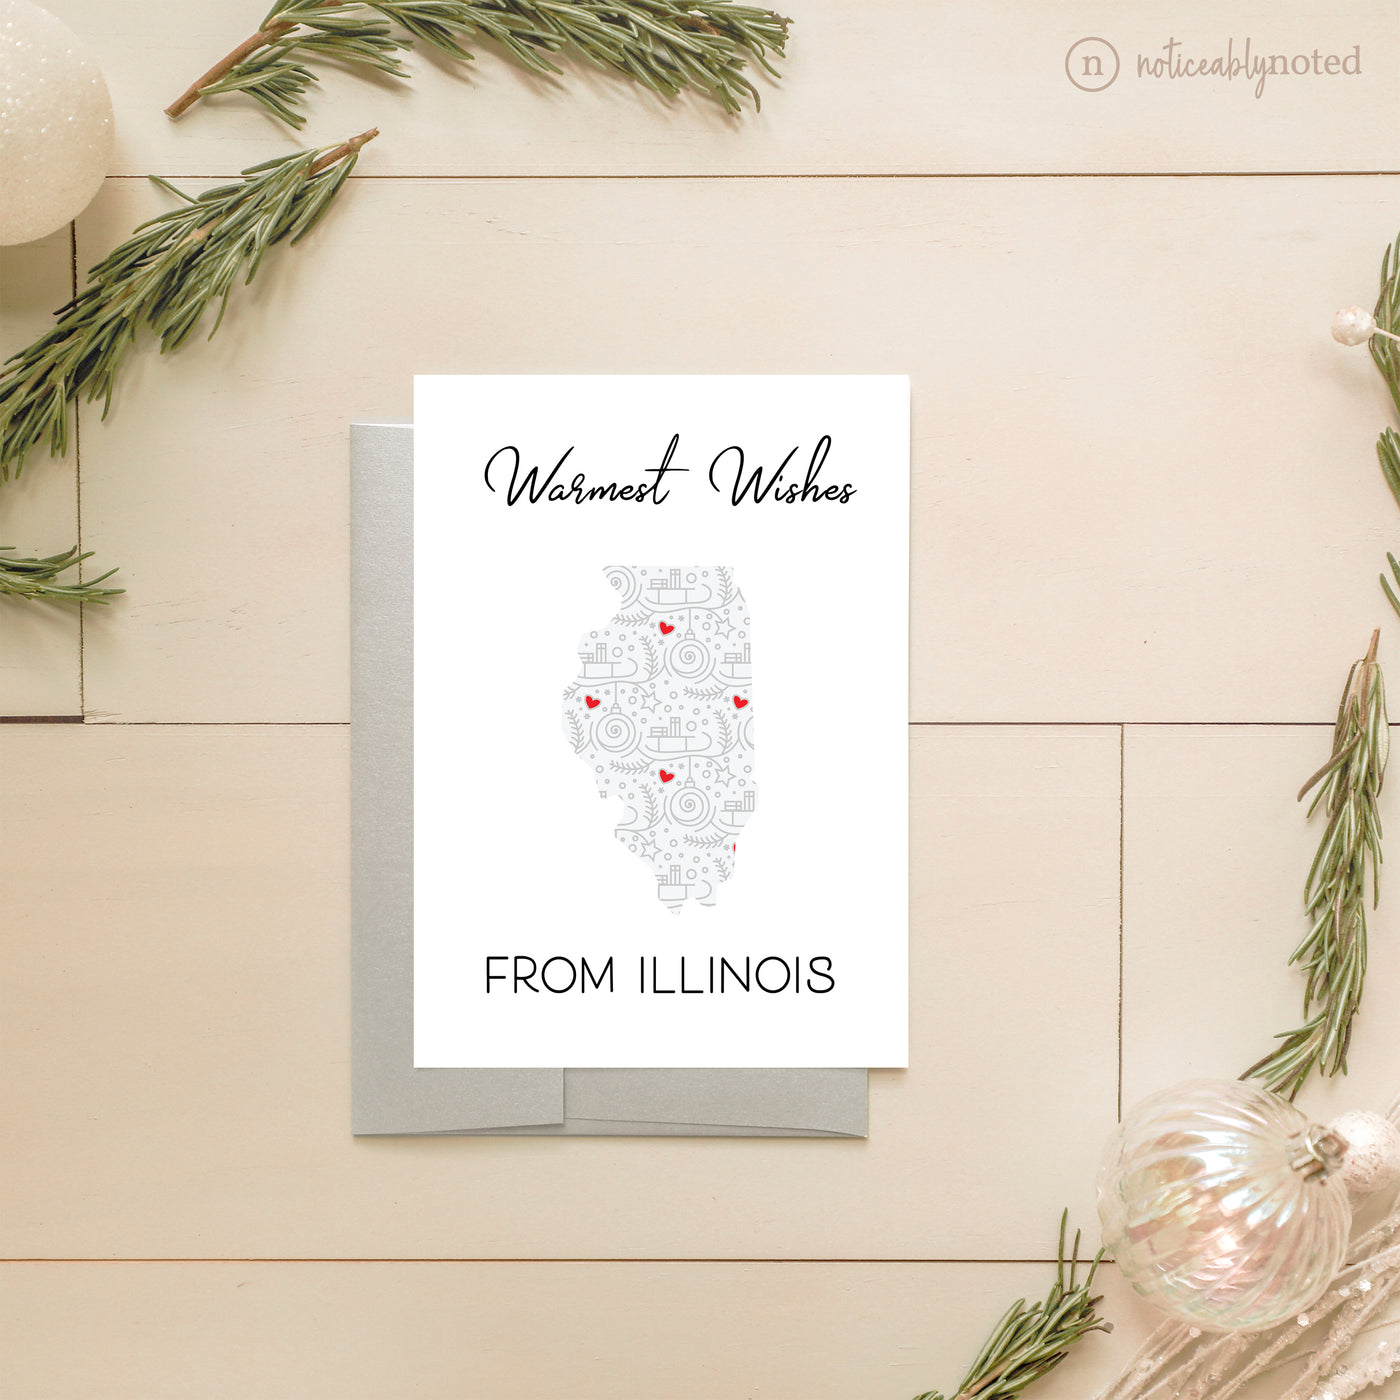 IL Holiday Greeting Cards | Noticeably Noted